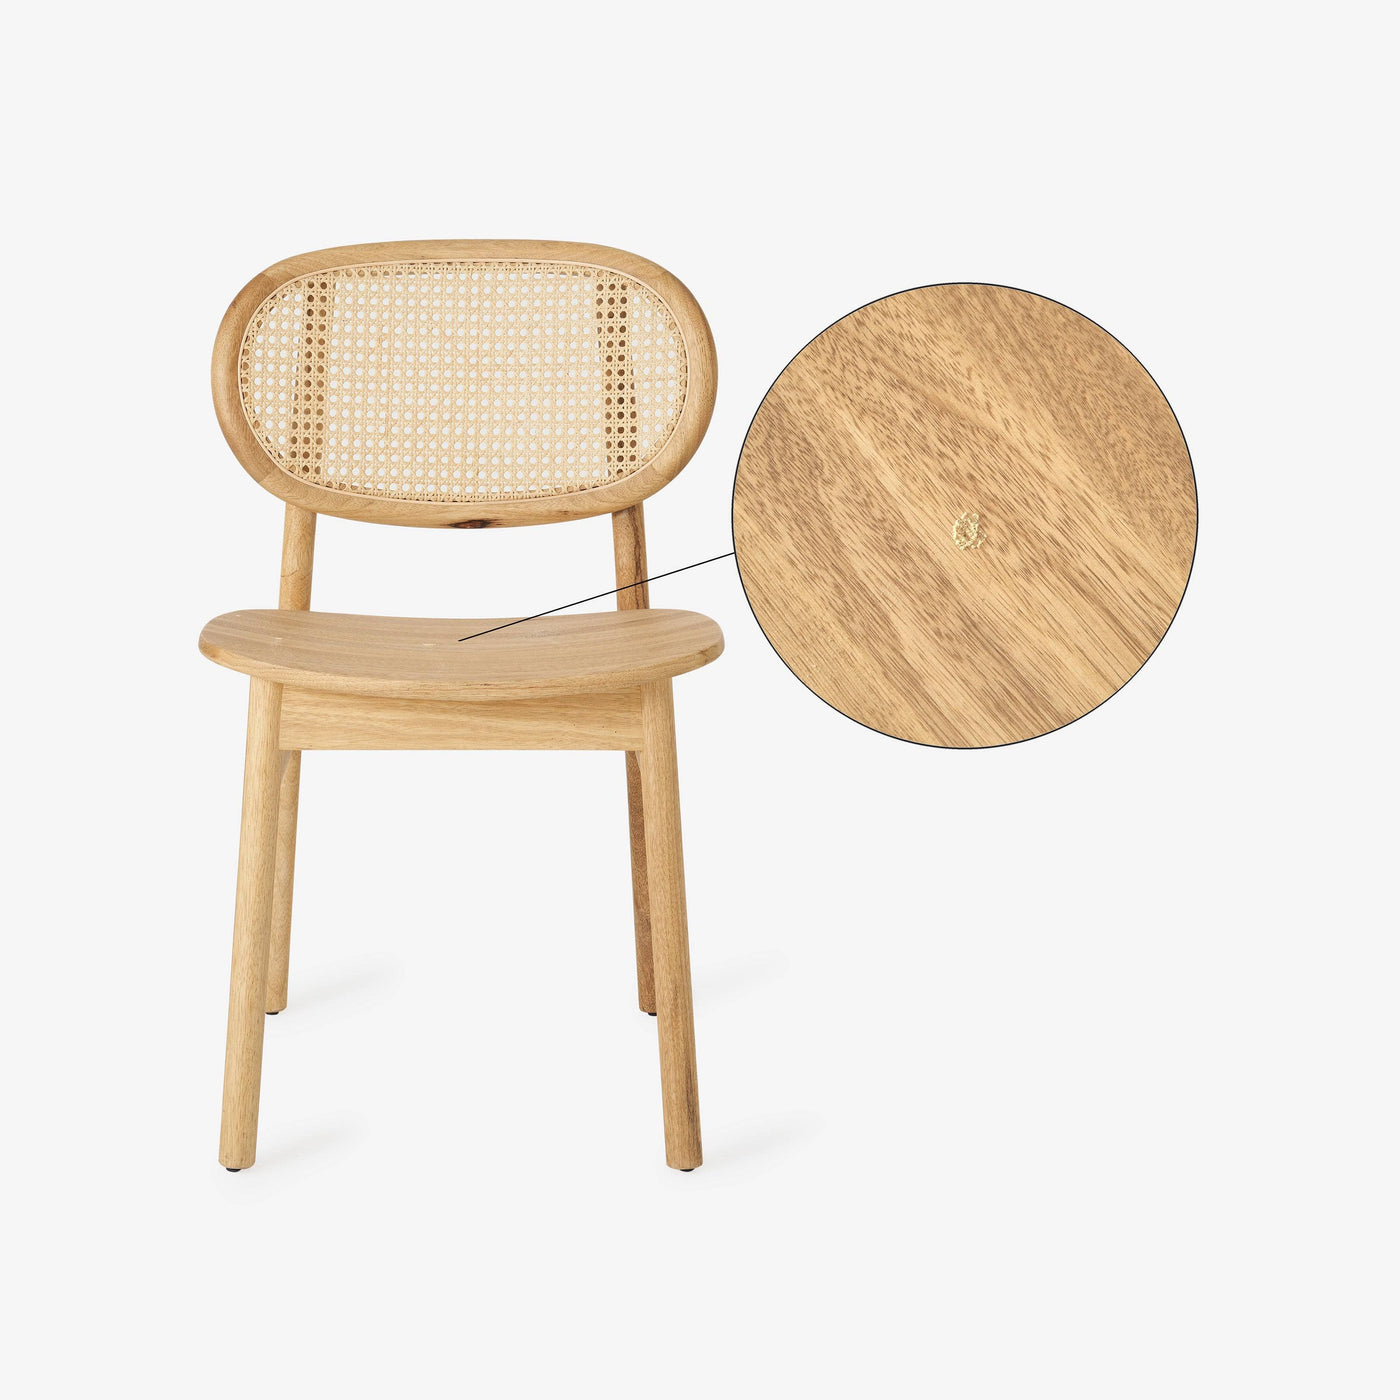 Palermo Wooden Rattan Chair, Natural 2